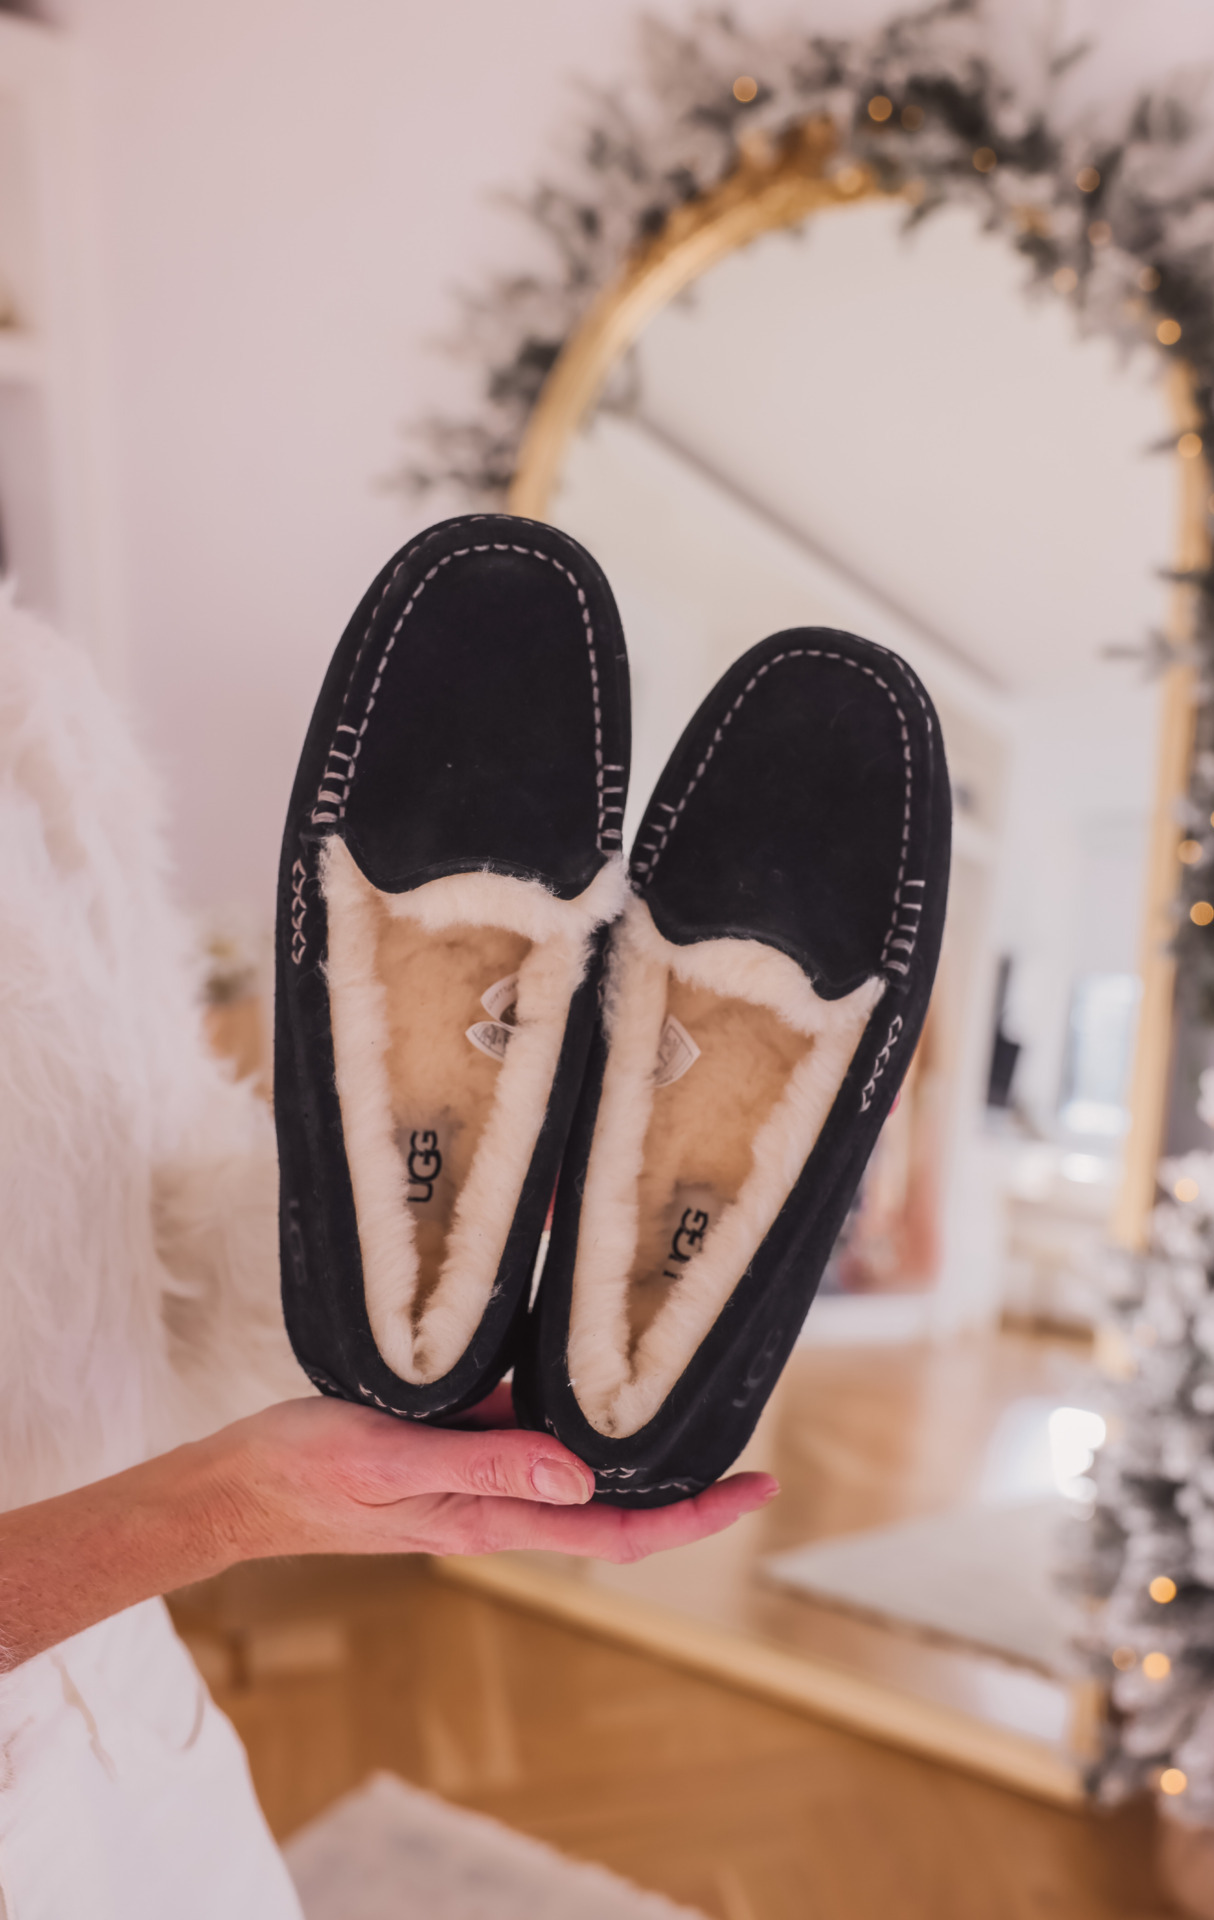 Ugg Moccasin Slippers | Affordable Cozy Gifts